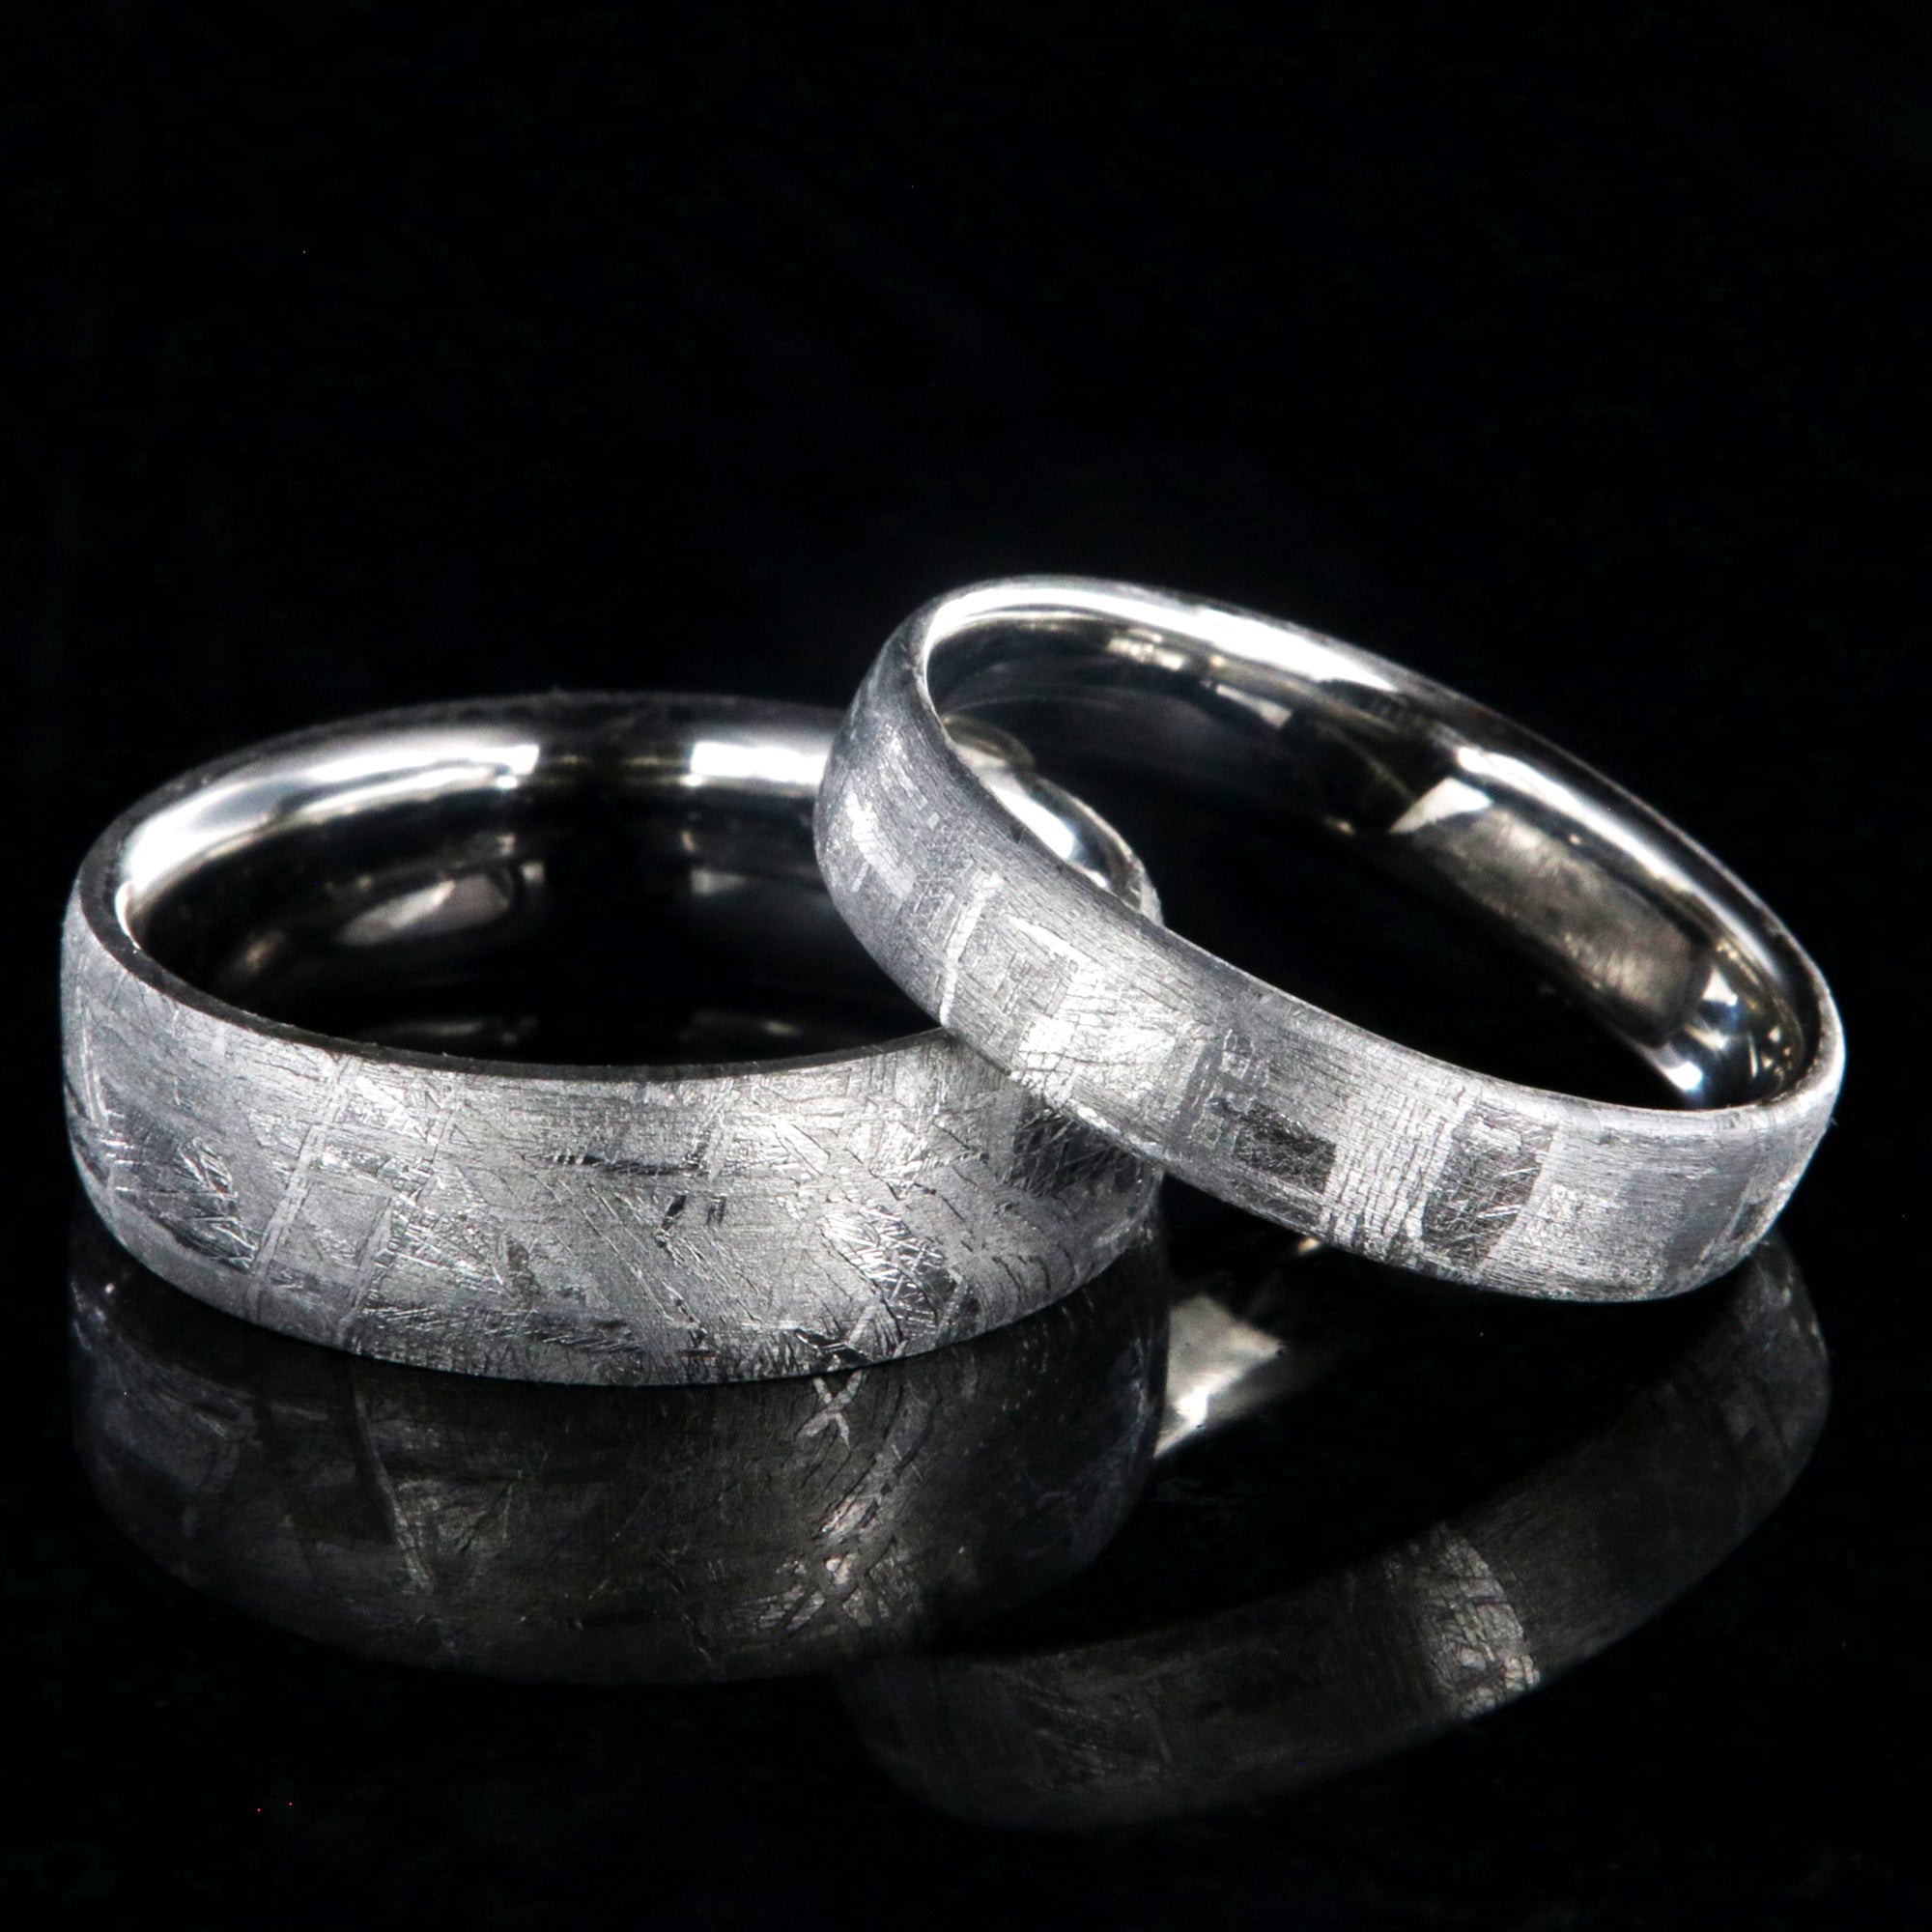 His and her matching ring set with a 7mm wide and 5mm wide Gibeon meteorite rings